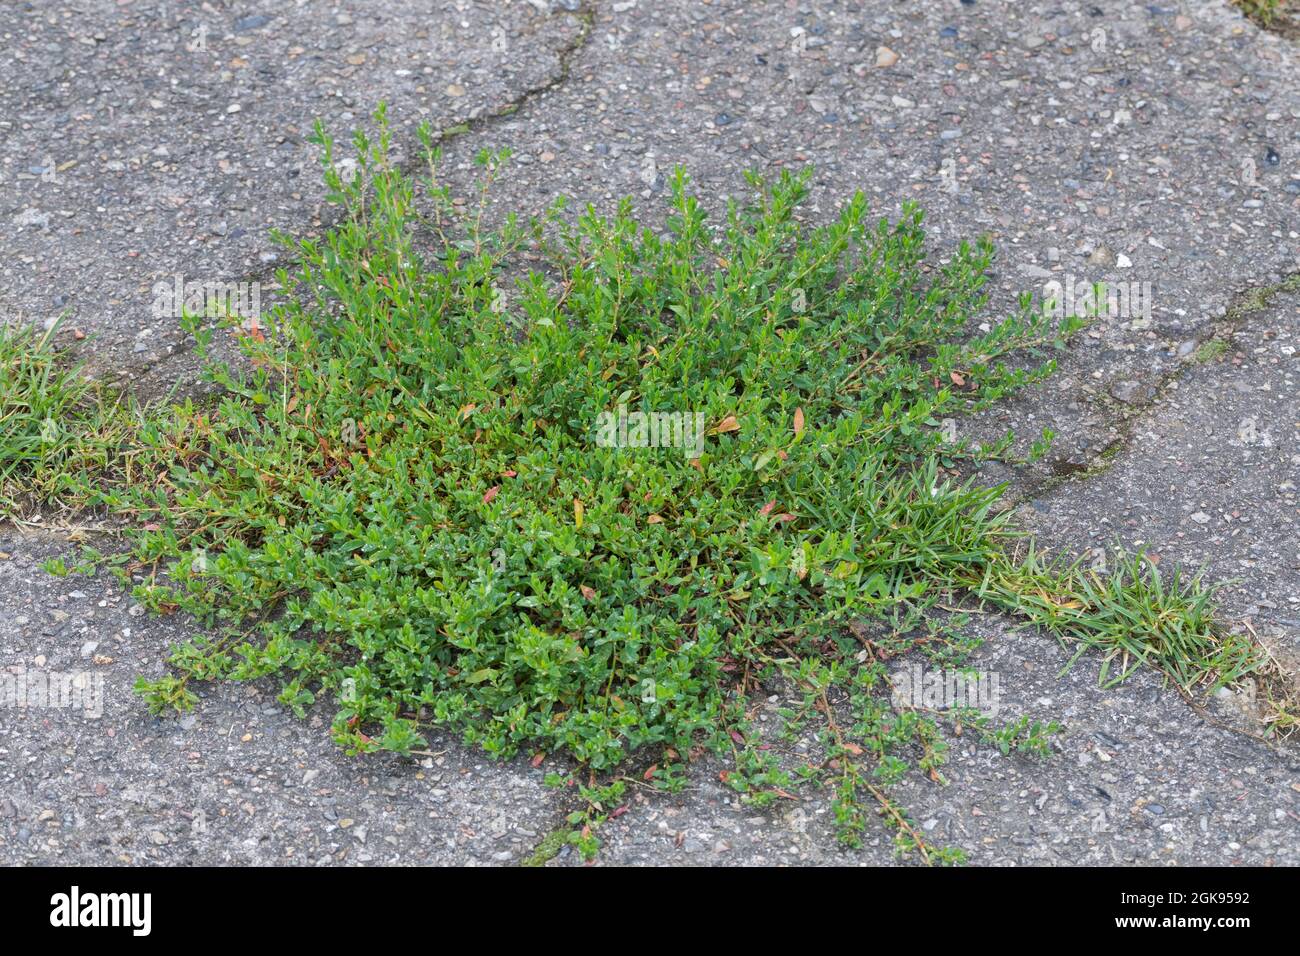 Small-leaved knotgrass, Oval-leaf knotweed (Polygonum arenastrum, Polygonum aviculare ssp. arenastrum), on a pavement, Germany Stock Photo